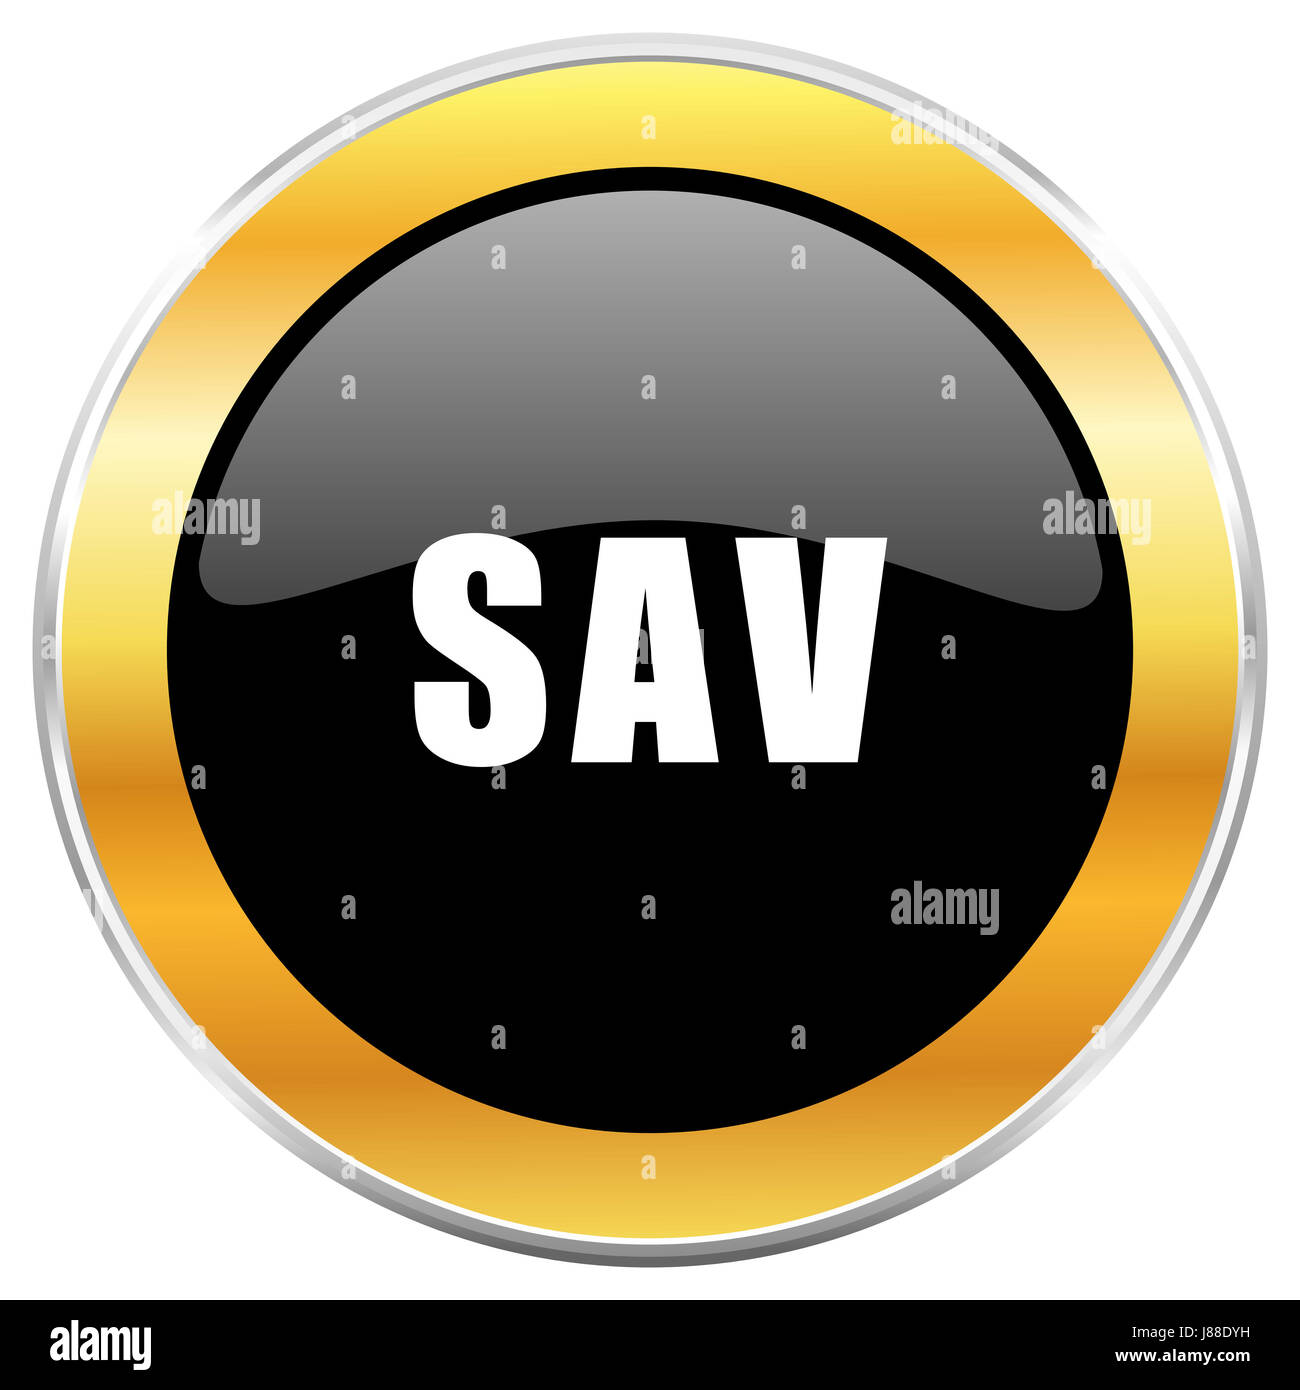 Sav black web icon with golden border isolated on white background. Round glossy button. Stock Photo